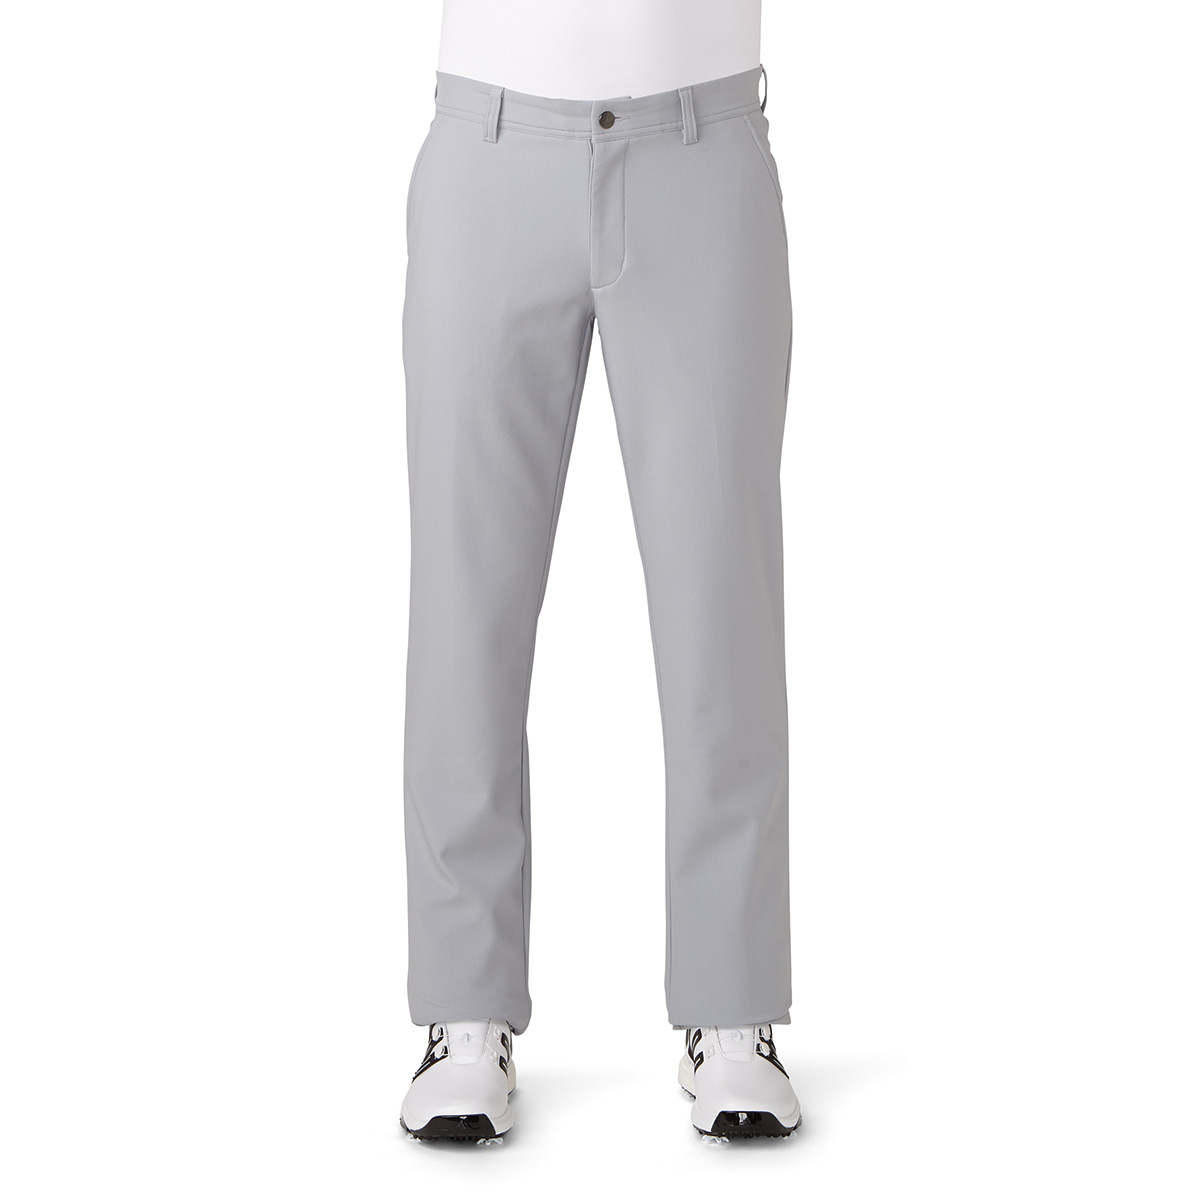 adidas climawarm trousers